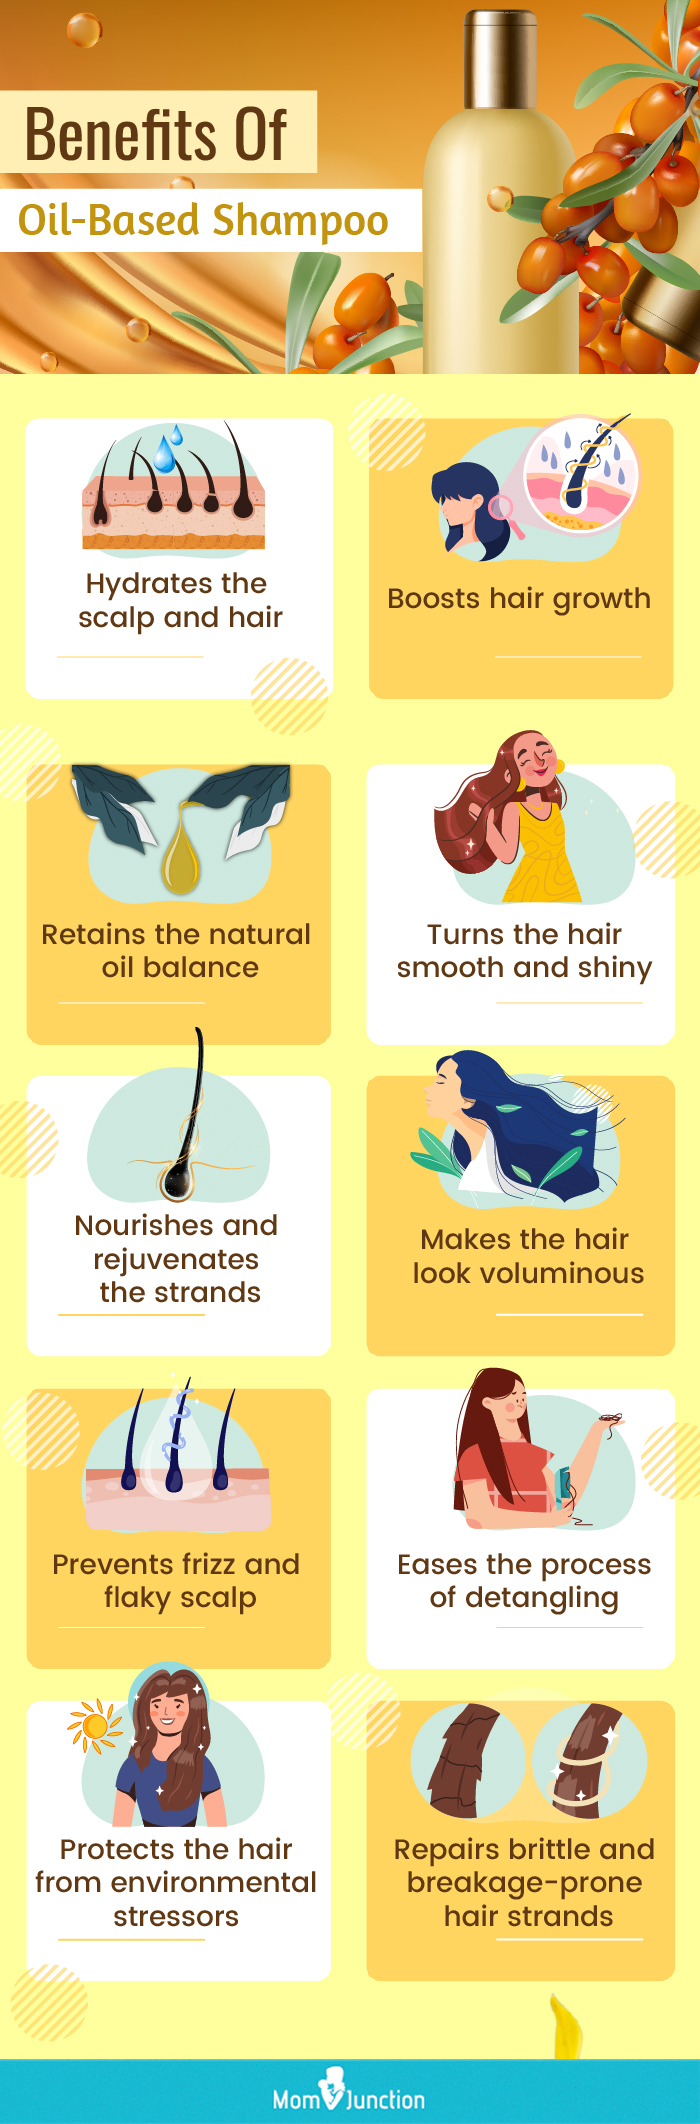 Benefits Of Oil Based Shampoos (infographic)